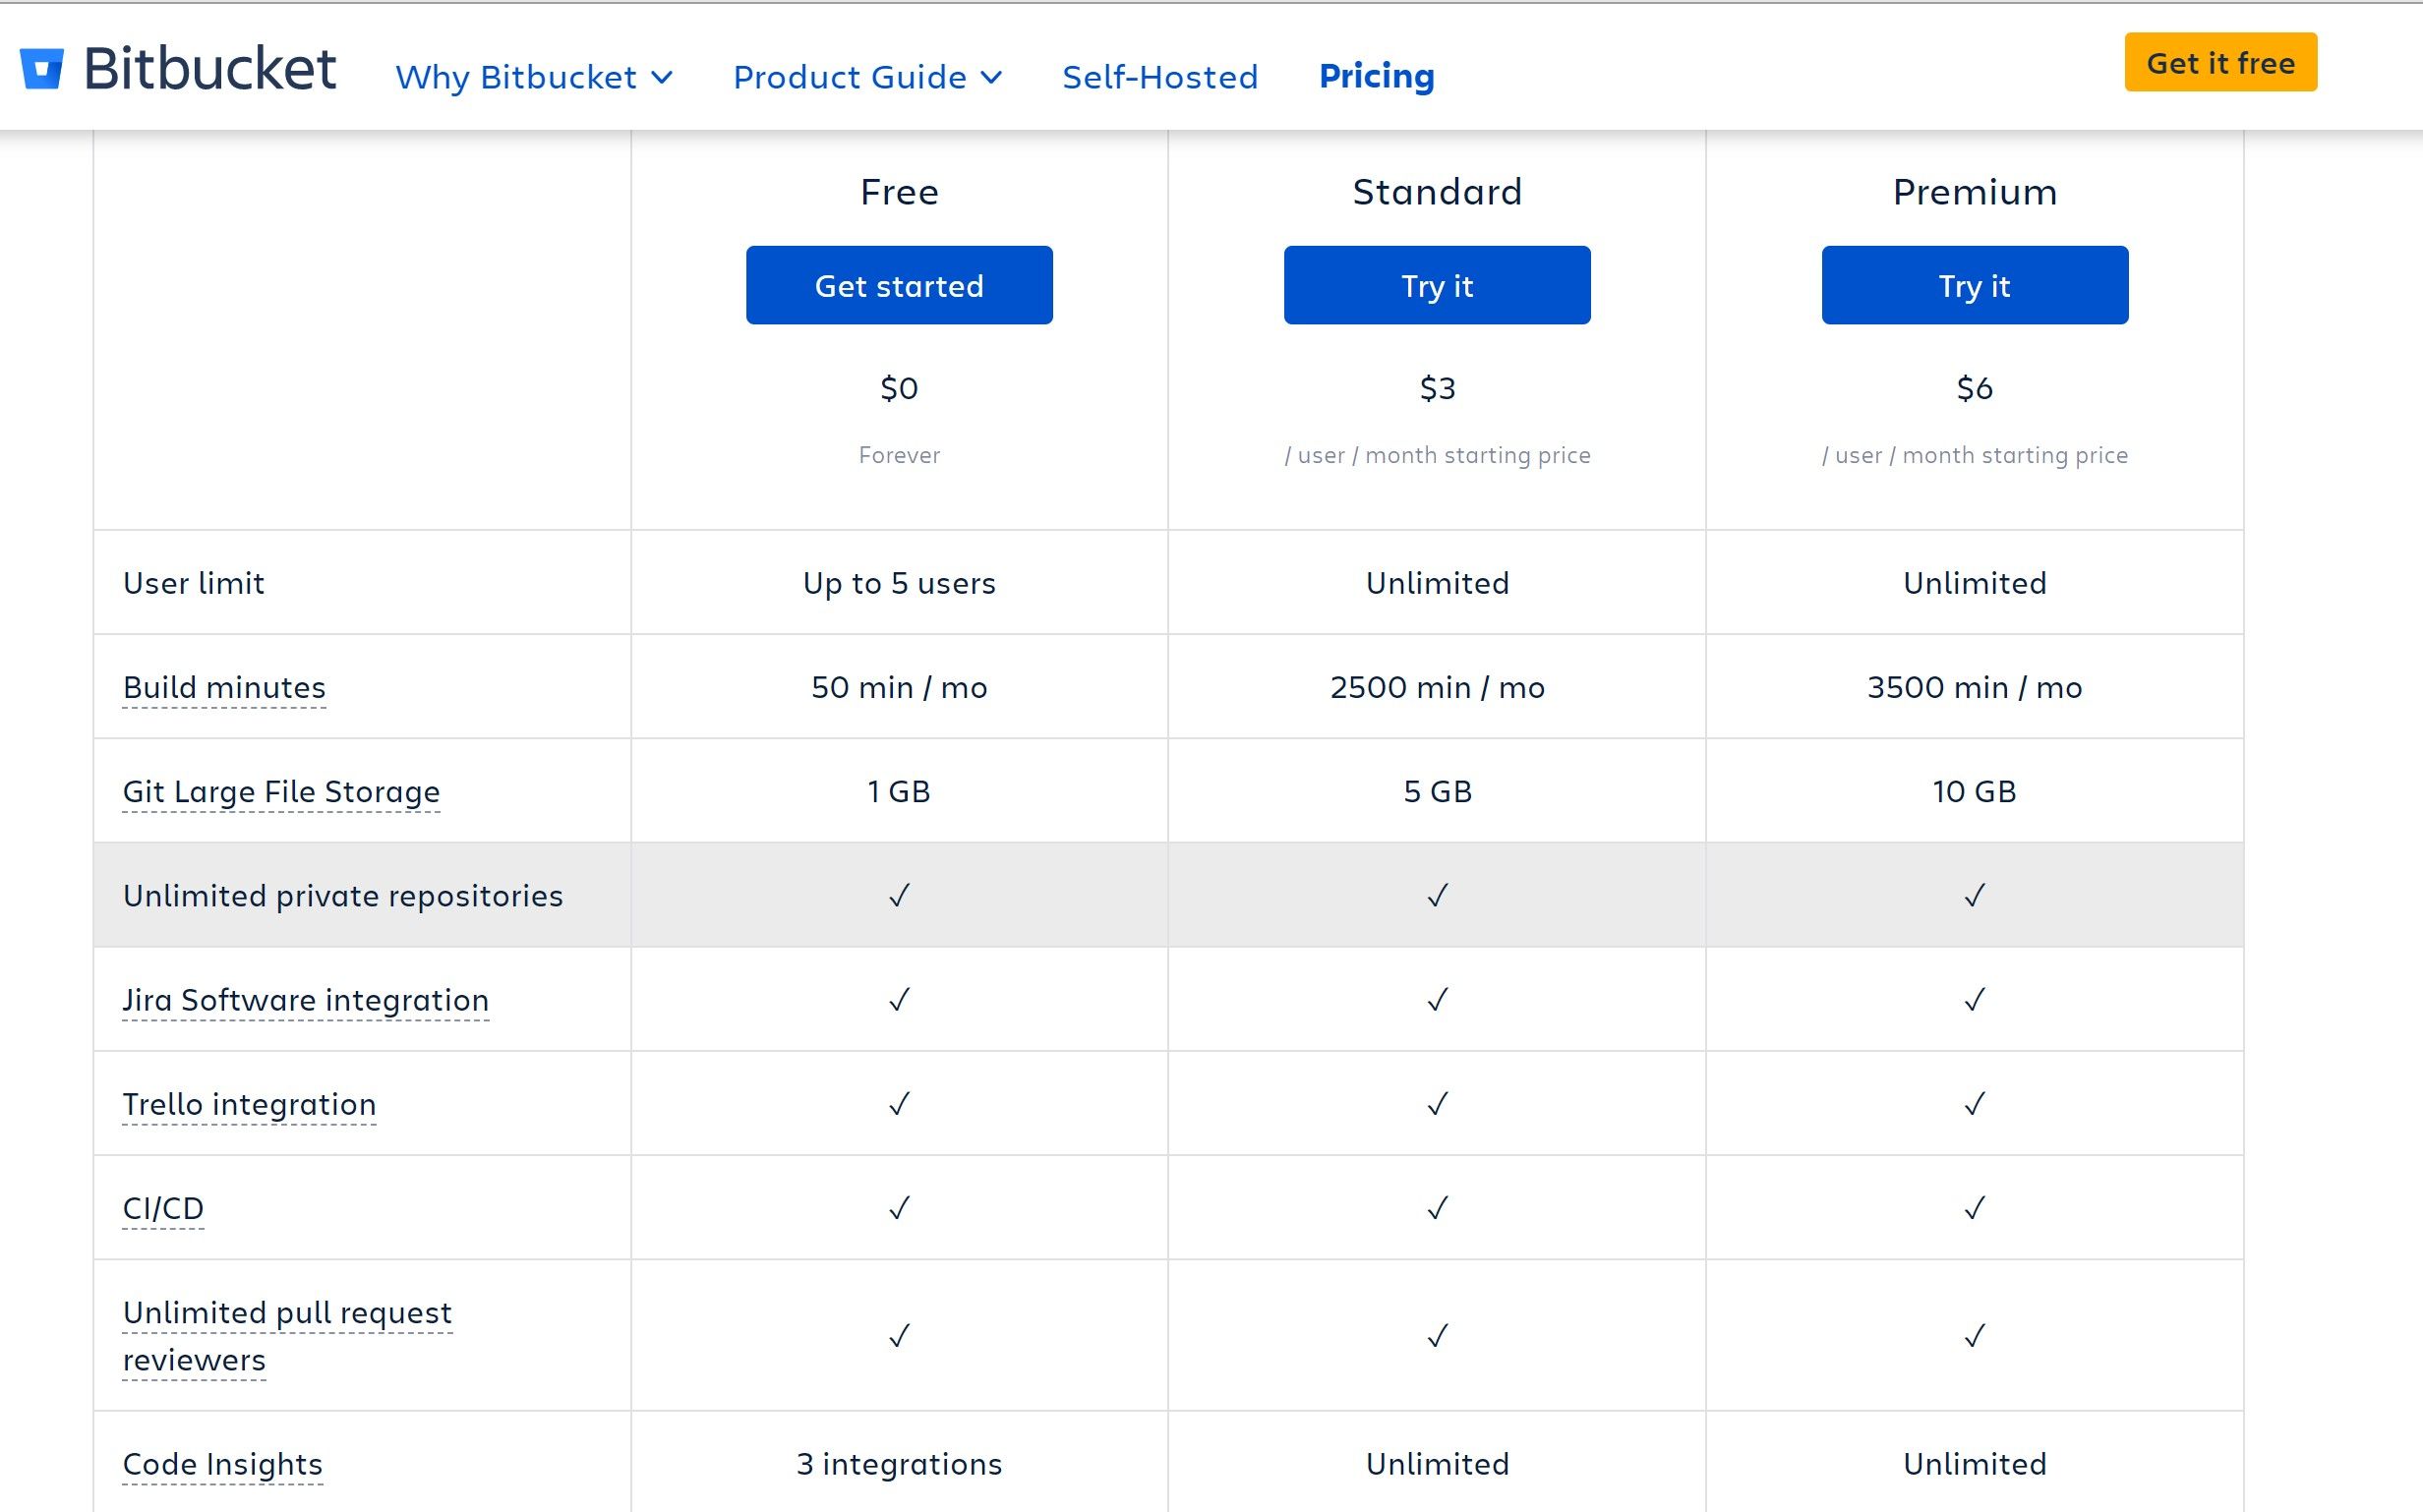 BitBucket pricing plans from the website